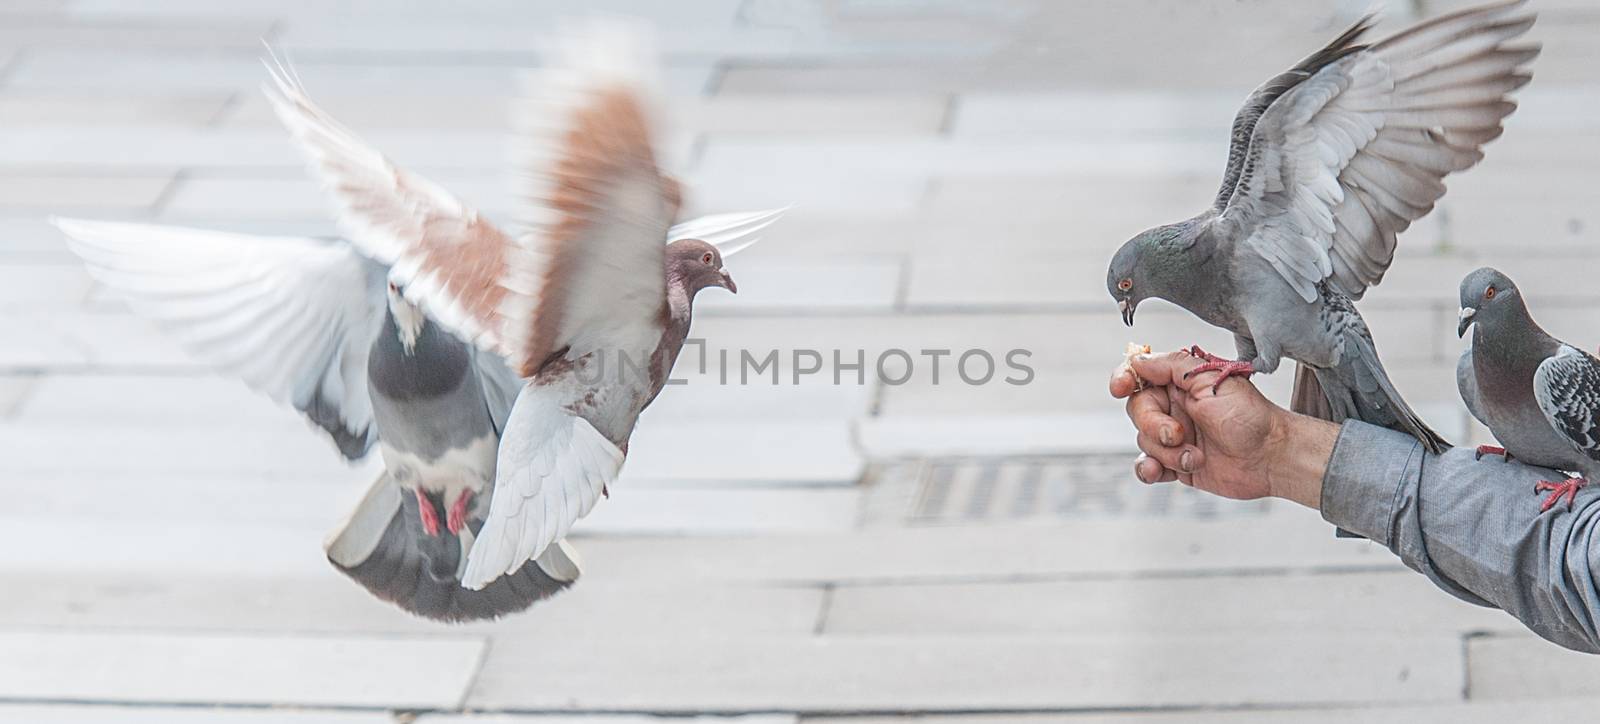 many pigeons feeding from a hand by sirspread